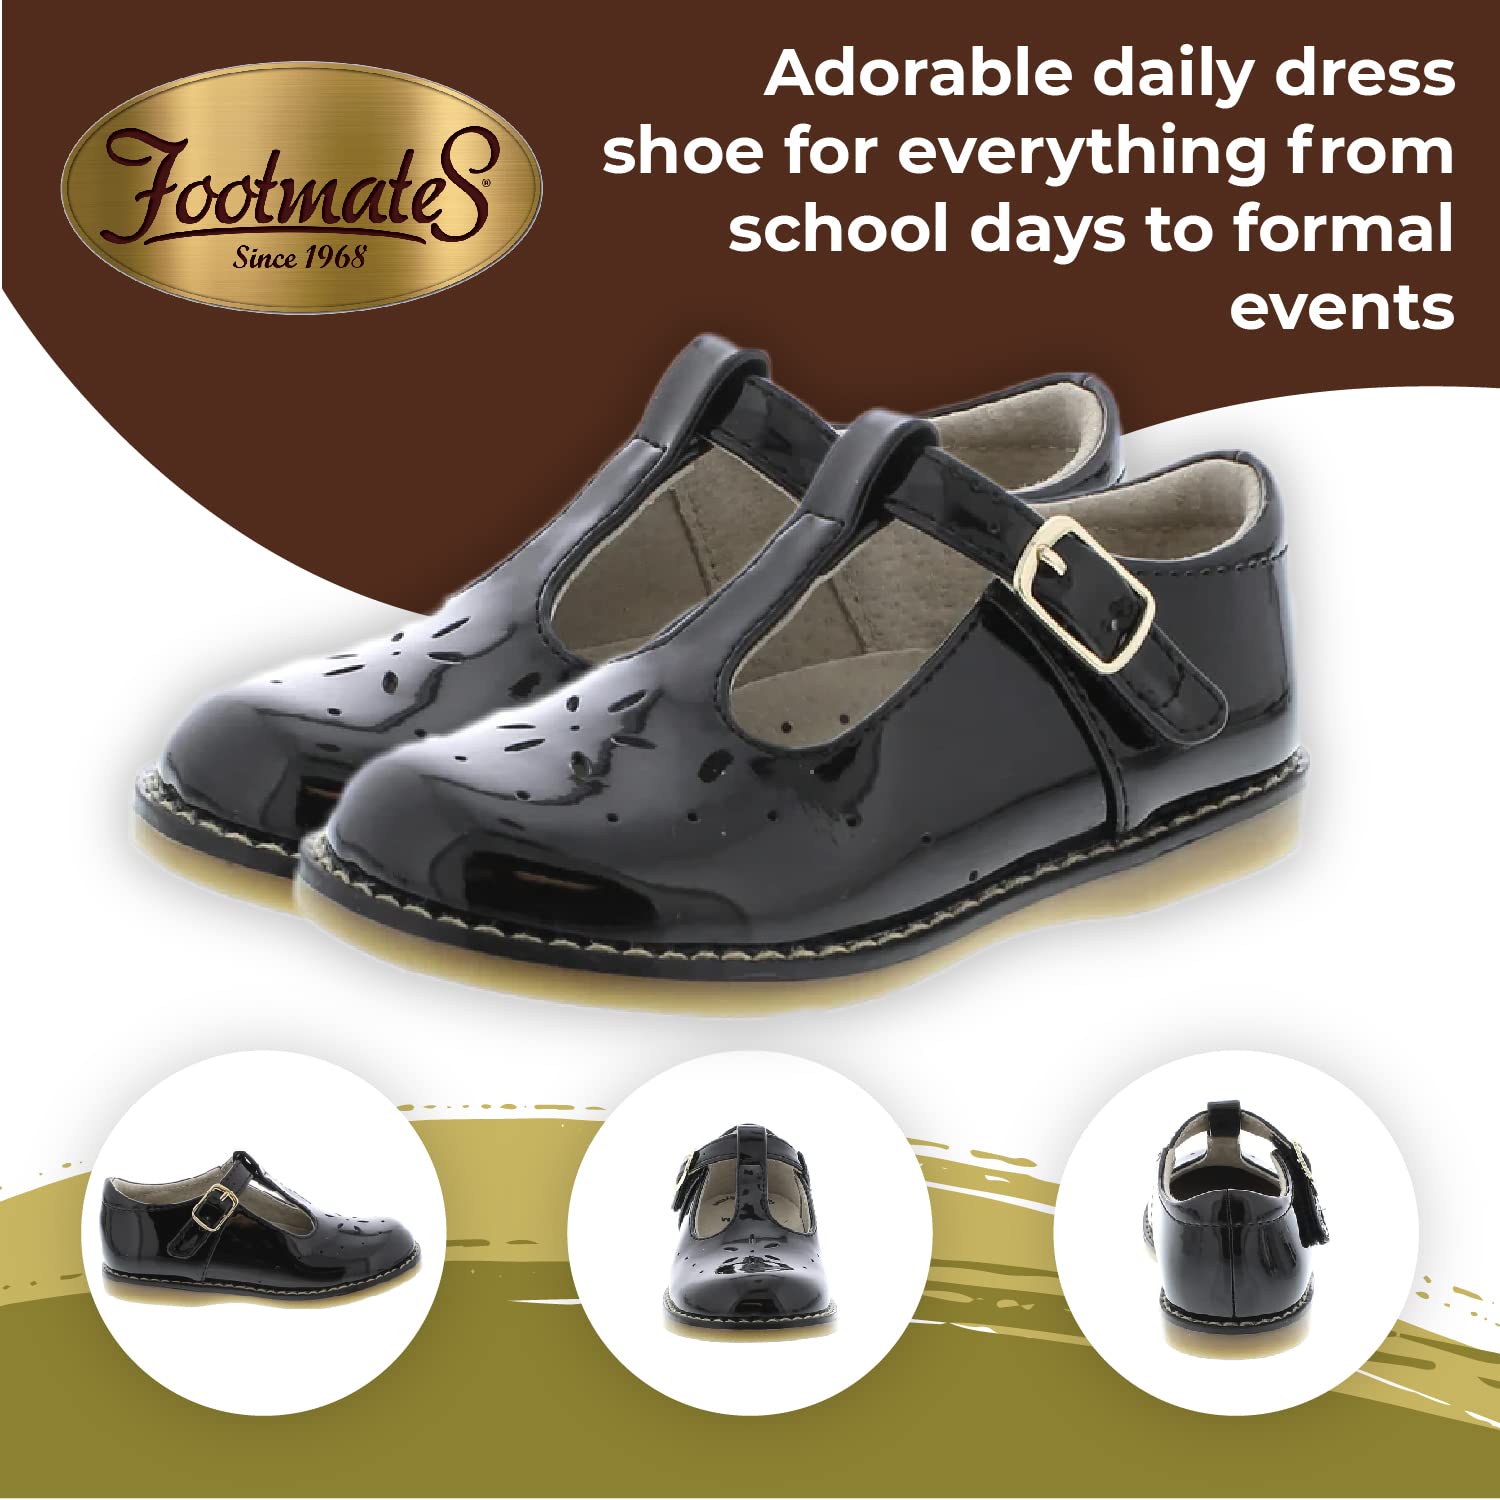 FOOTMATES Sherry Mary Jane Hook and Loop Leather T-Strap Shoes with Wide Toe Box and Custom-Fit Insoles, Non-Marking Outsoles - for Toddlers and Kids, Ages 1-8